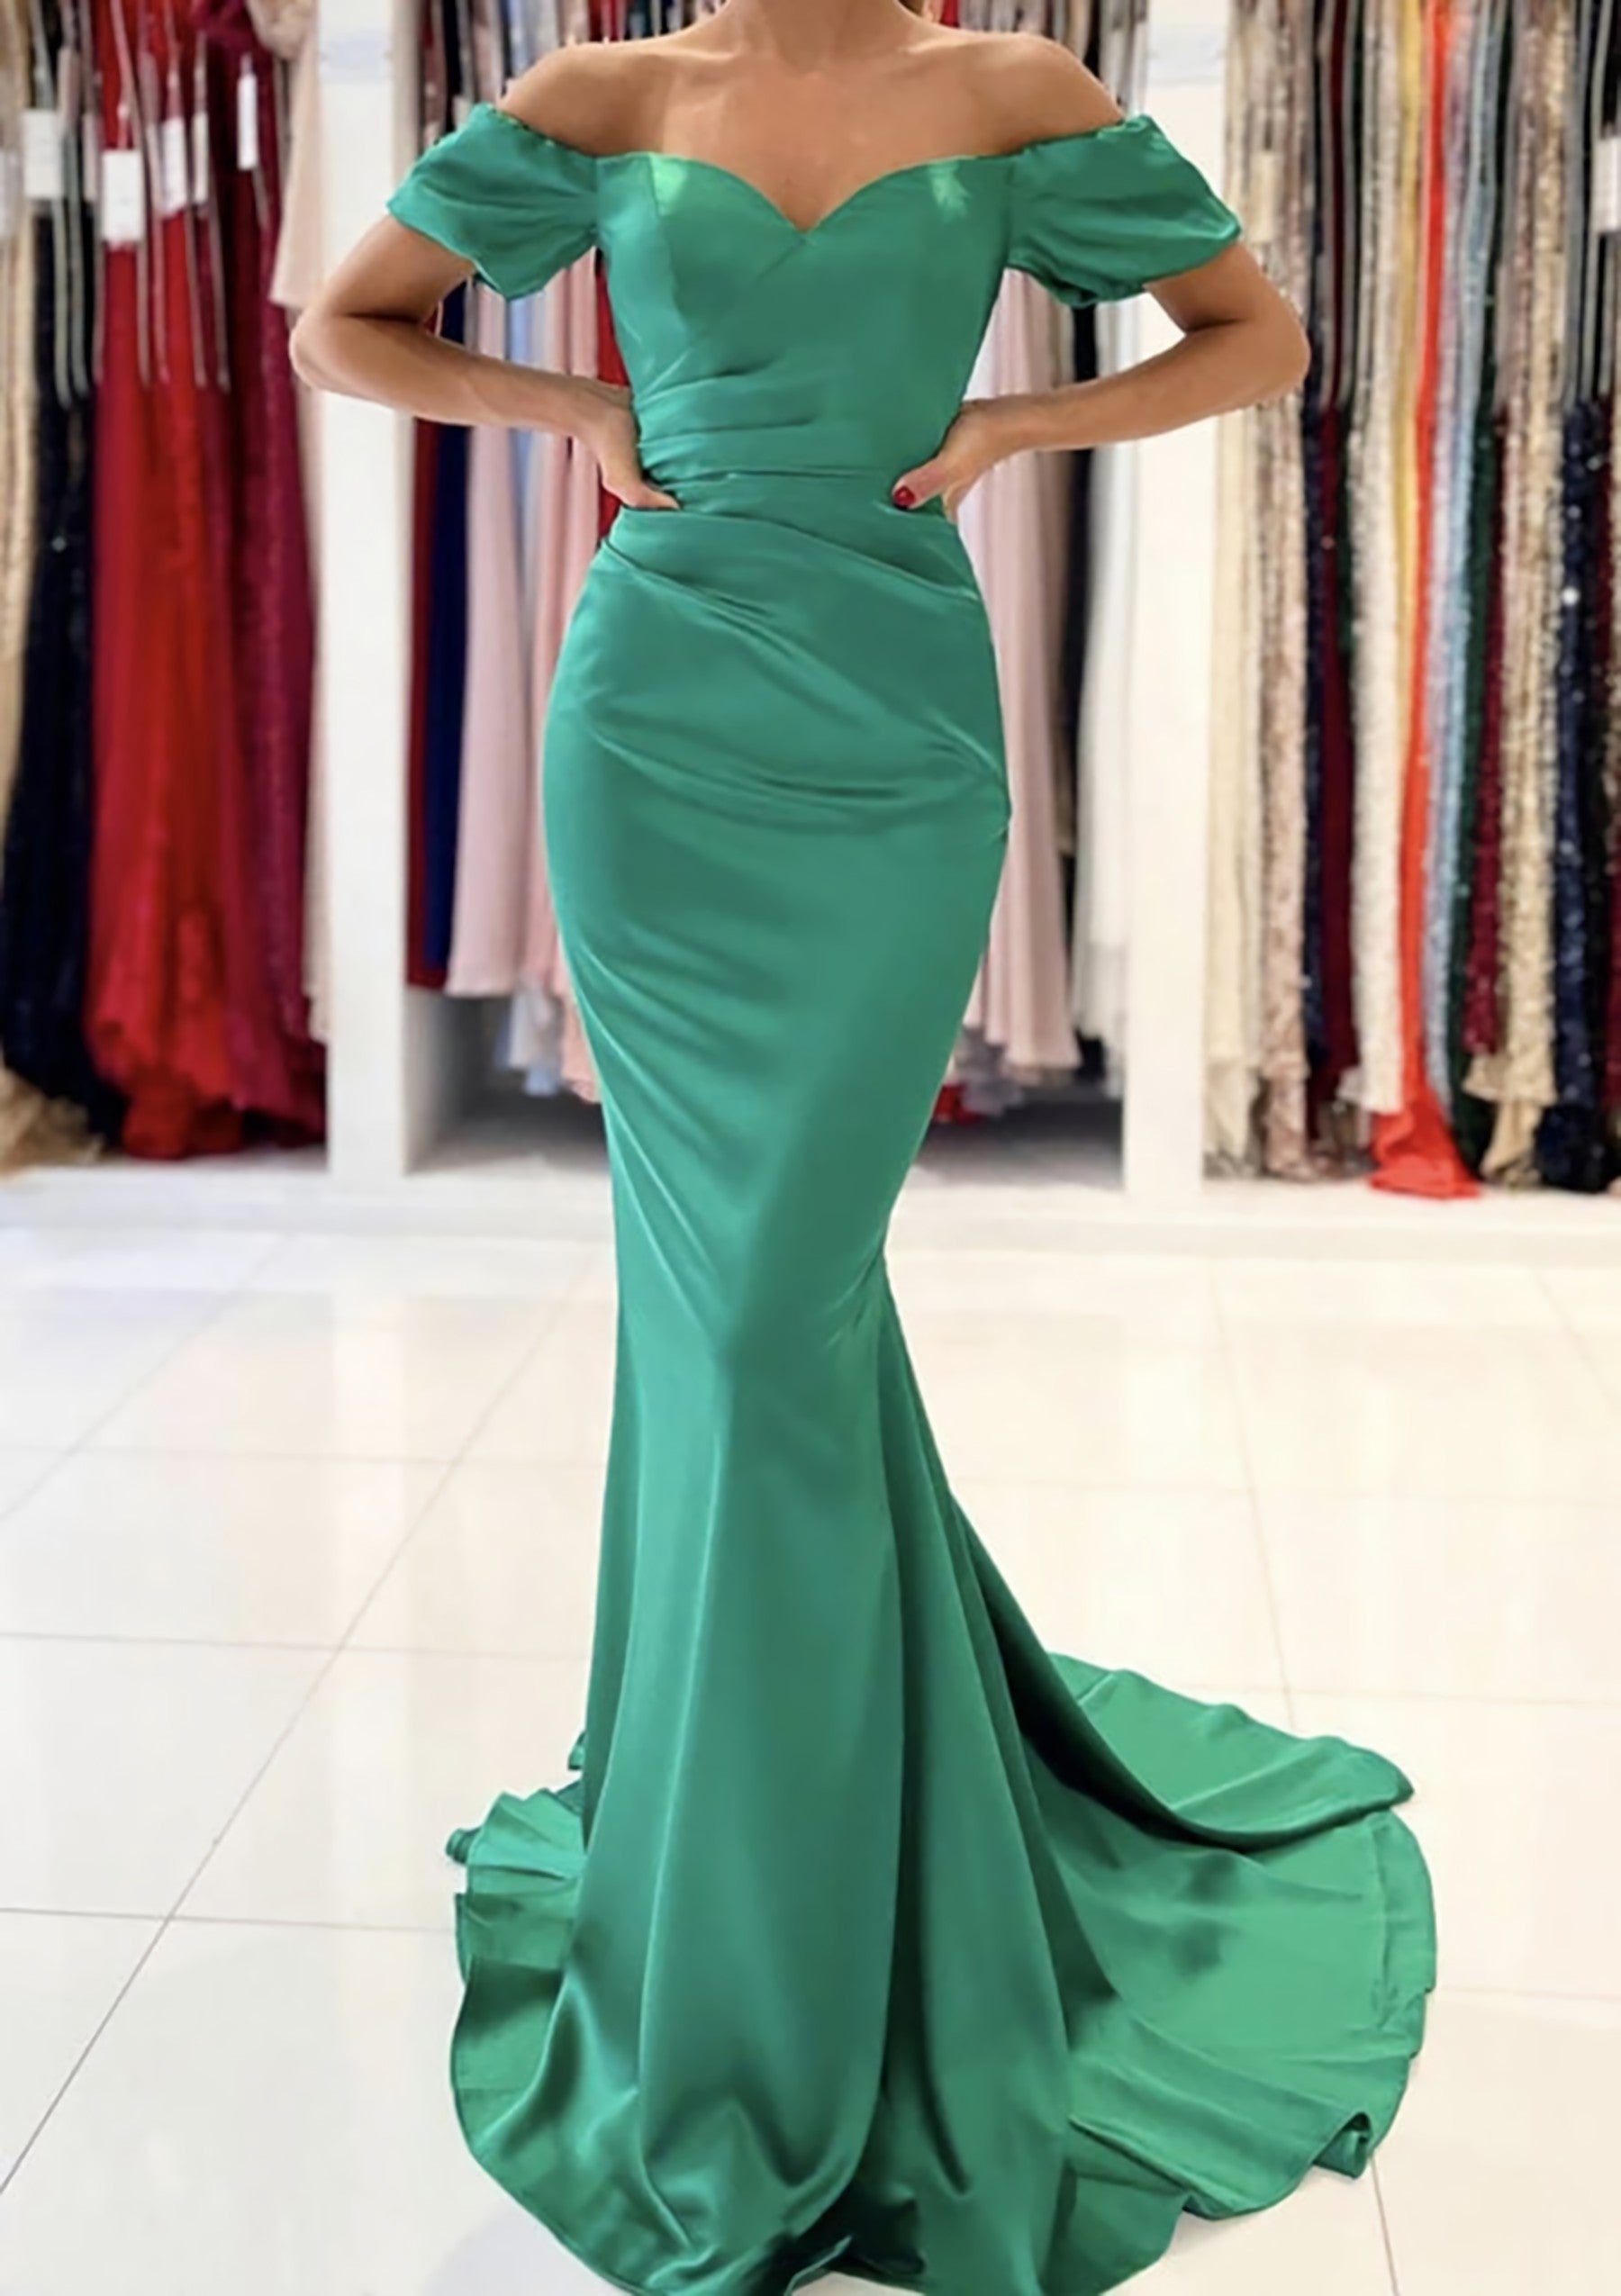 Prom Dress Colorful, Trumpet/Mermaid Off-the-Shoulder Short Sleeve Satin Sweep Train Prom Dress With Pleated